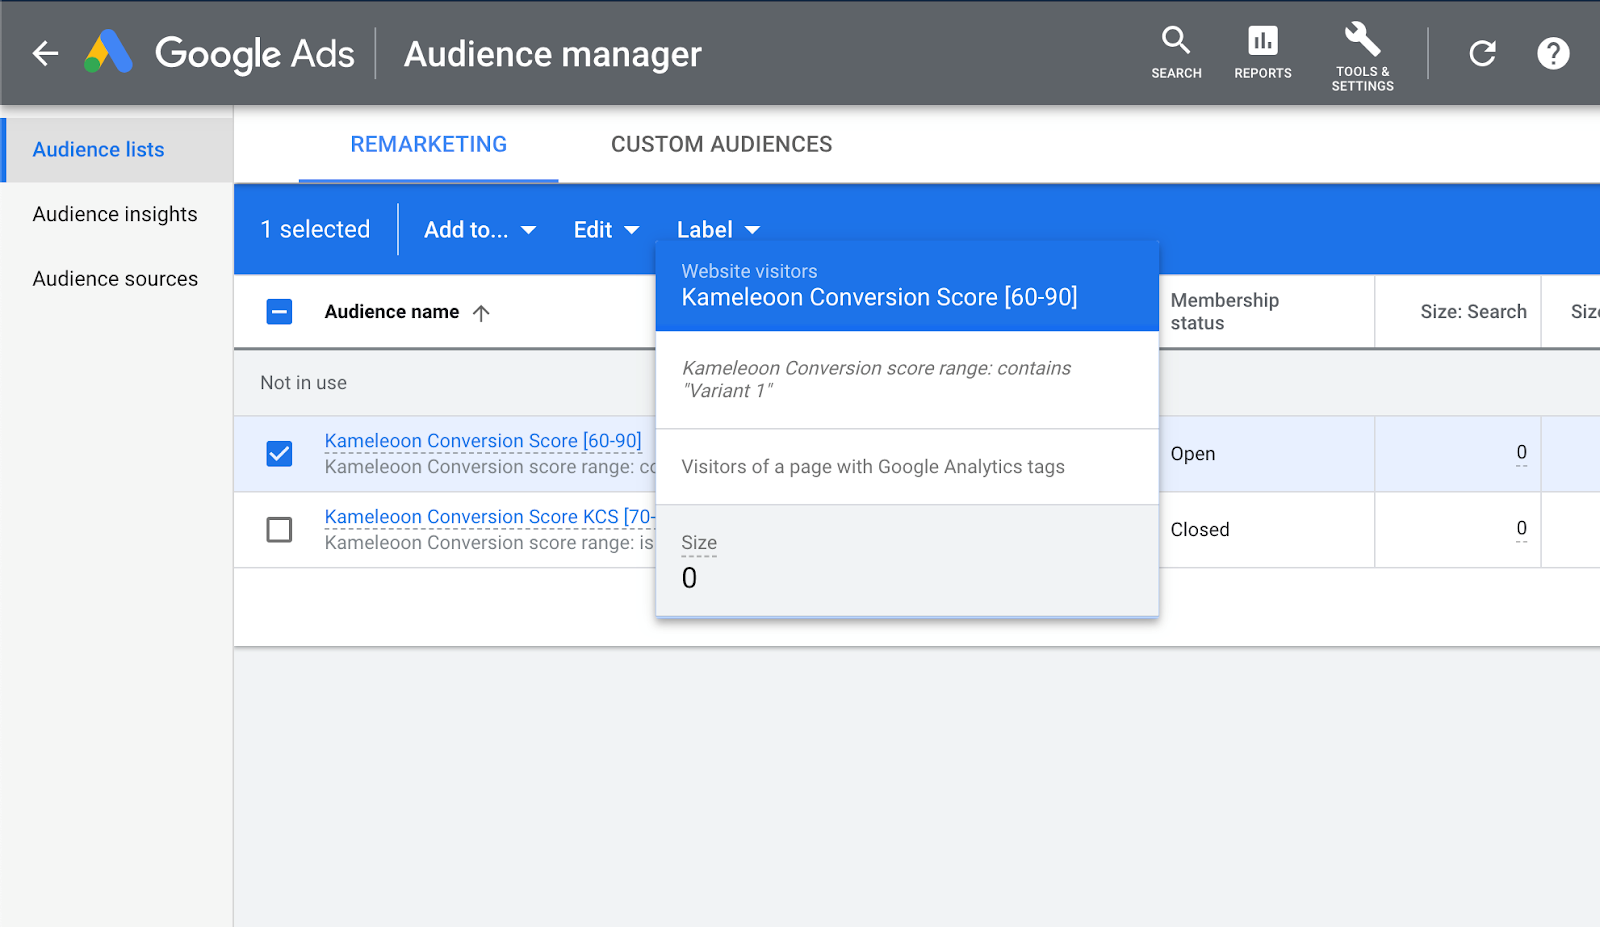 How to monitor results using the built-in Google Ads or Facebook Ad dashboards